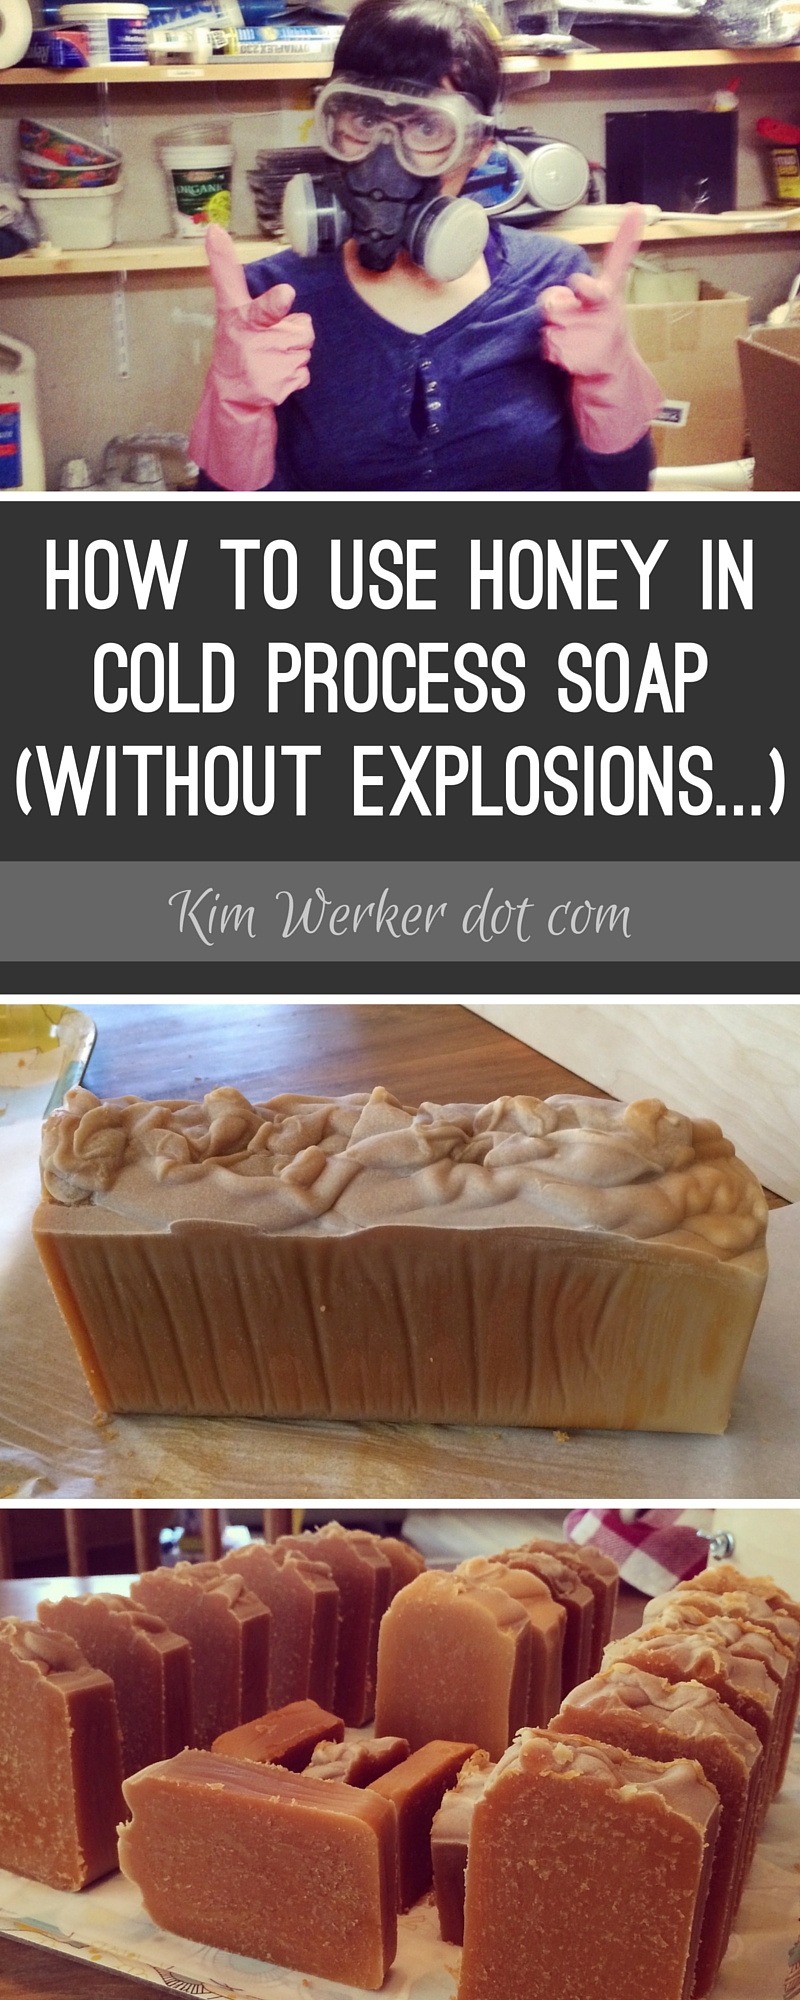 Goat Milk Soap with Honey - Oh, The Things We'll Make!